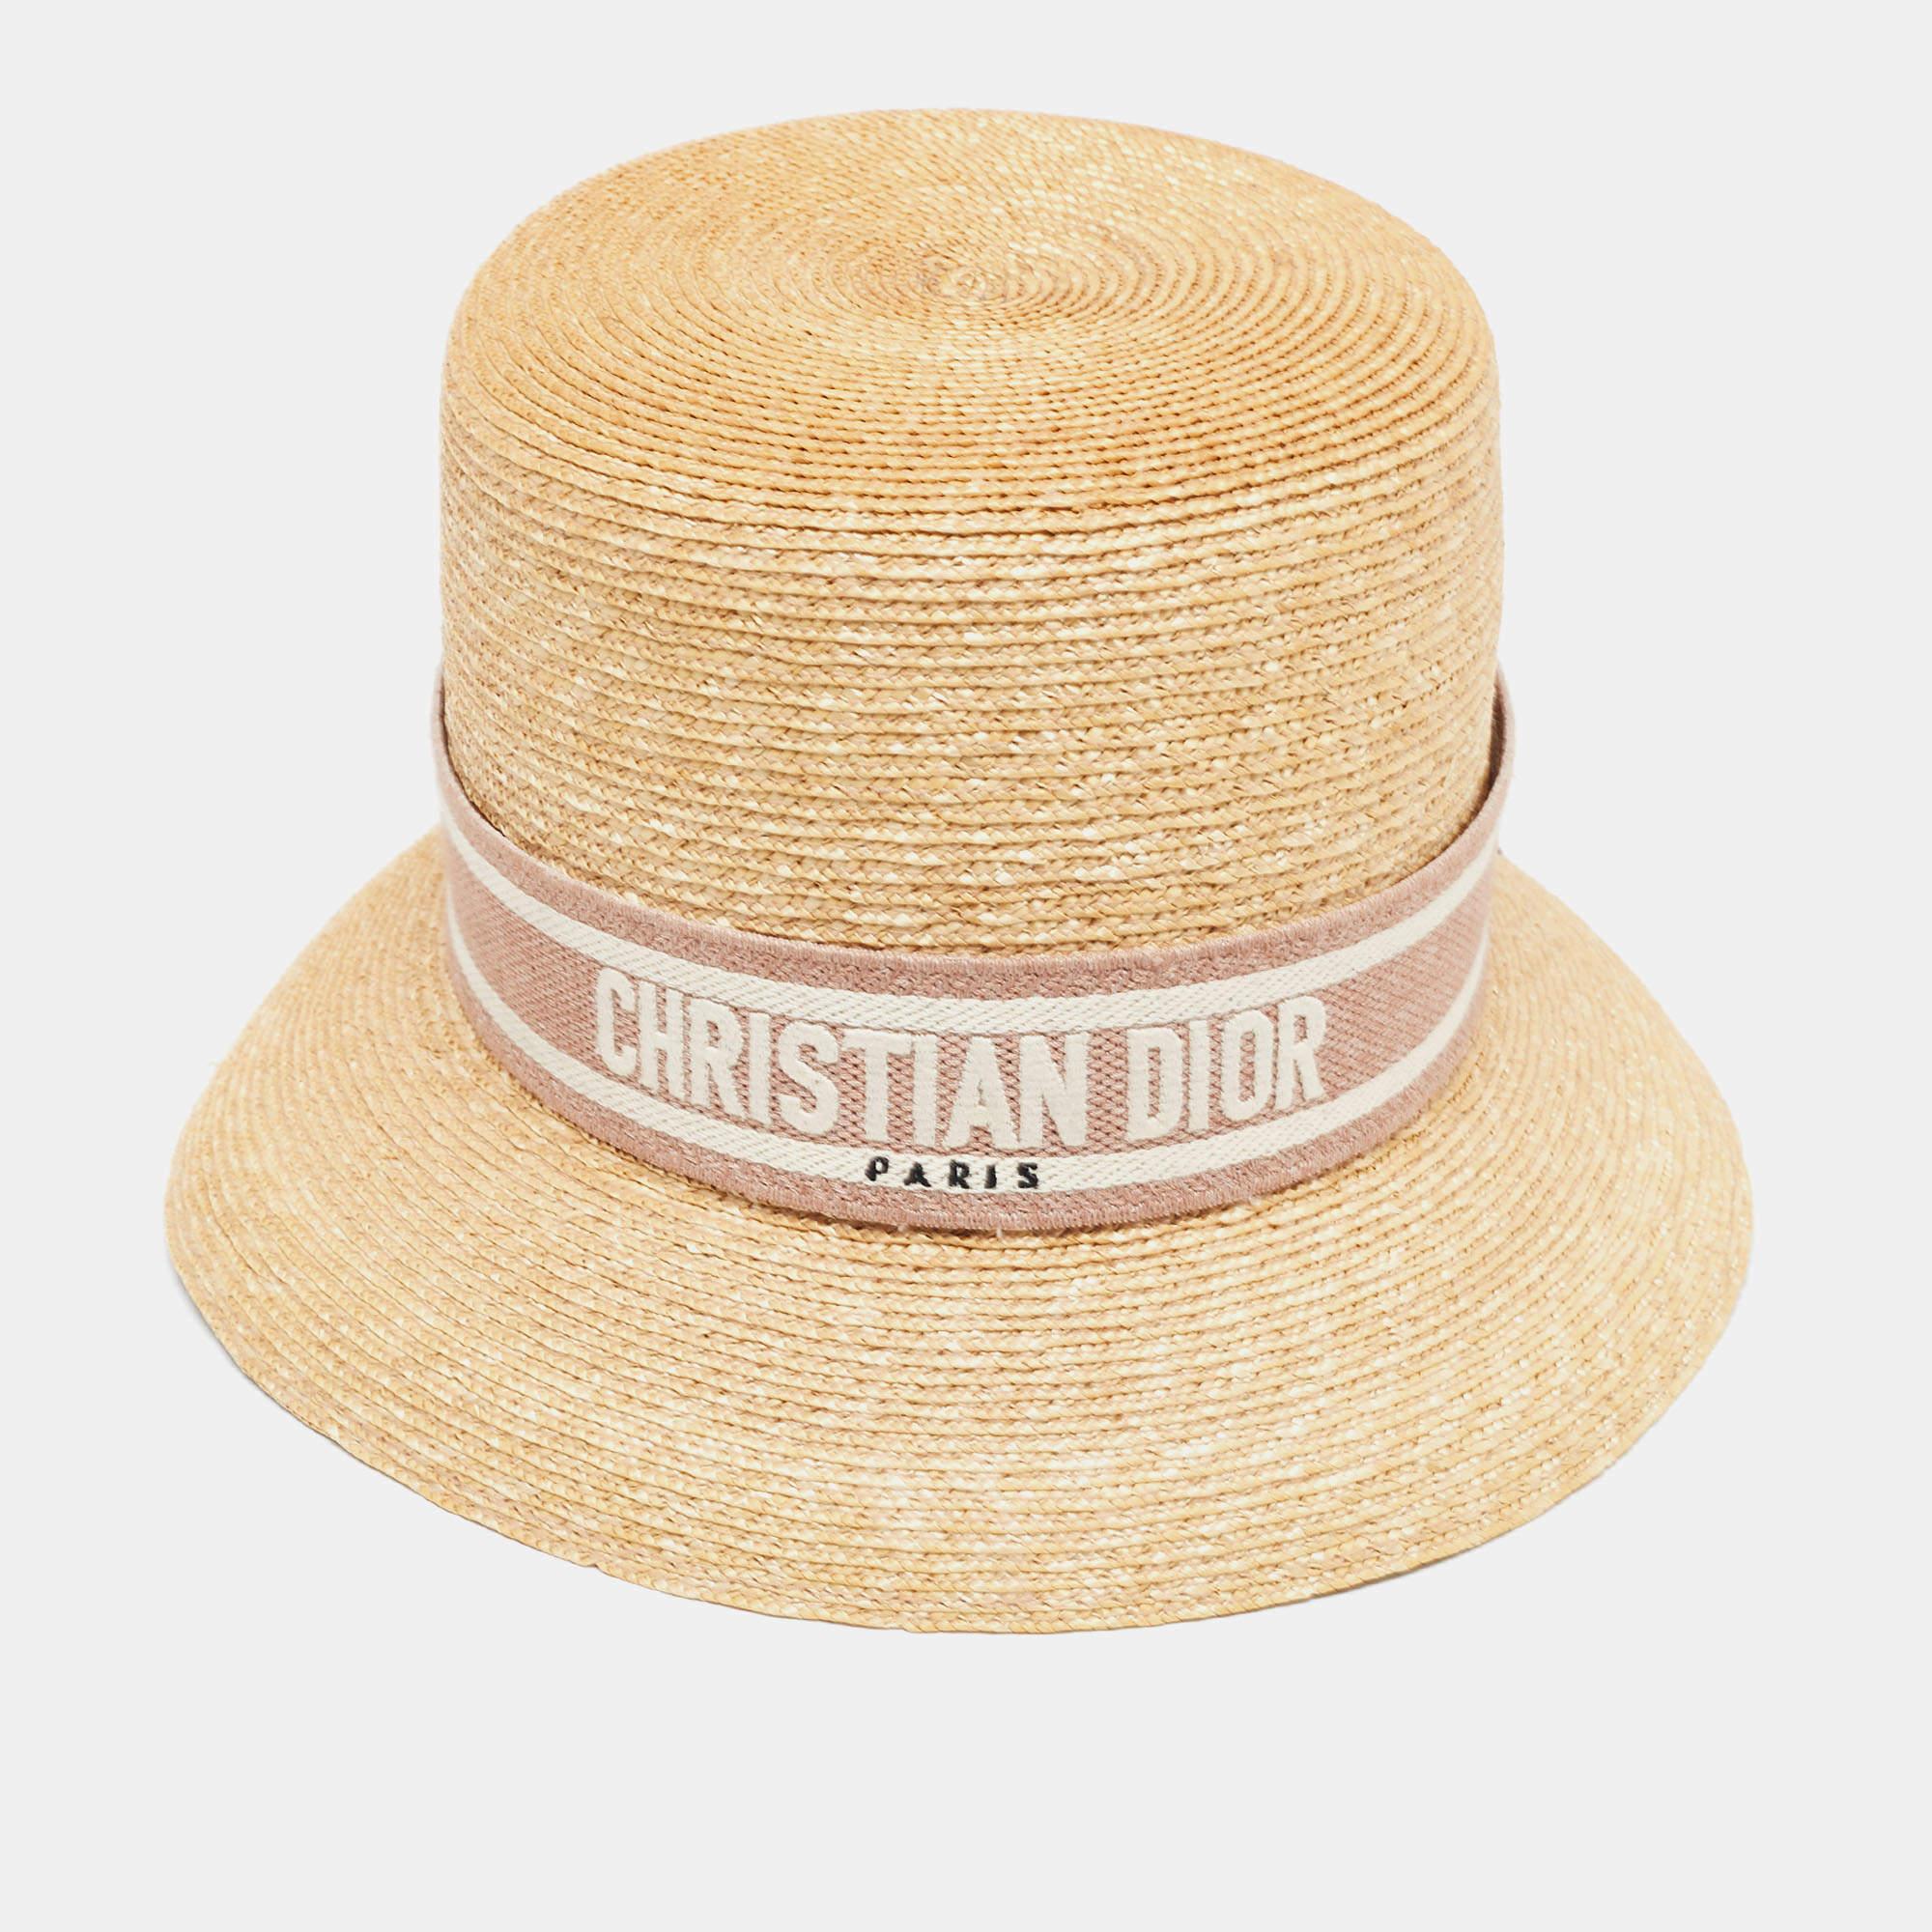 With this chic and gorgeous Dioresort hat from the House of Christian Dior, your style will look polished! It is crafted using straw material, with a logo band detail highlighting its shape. Match this hat with your summer outfits and exude nothing